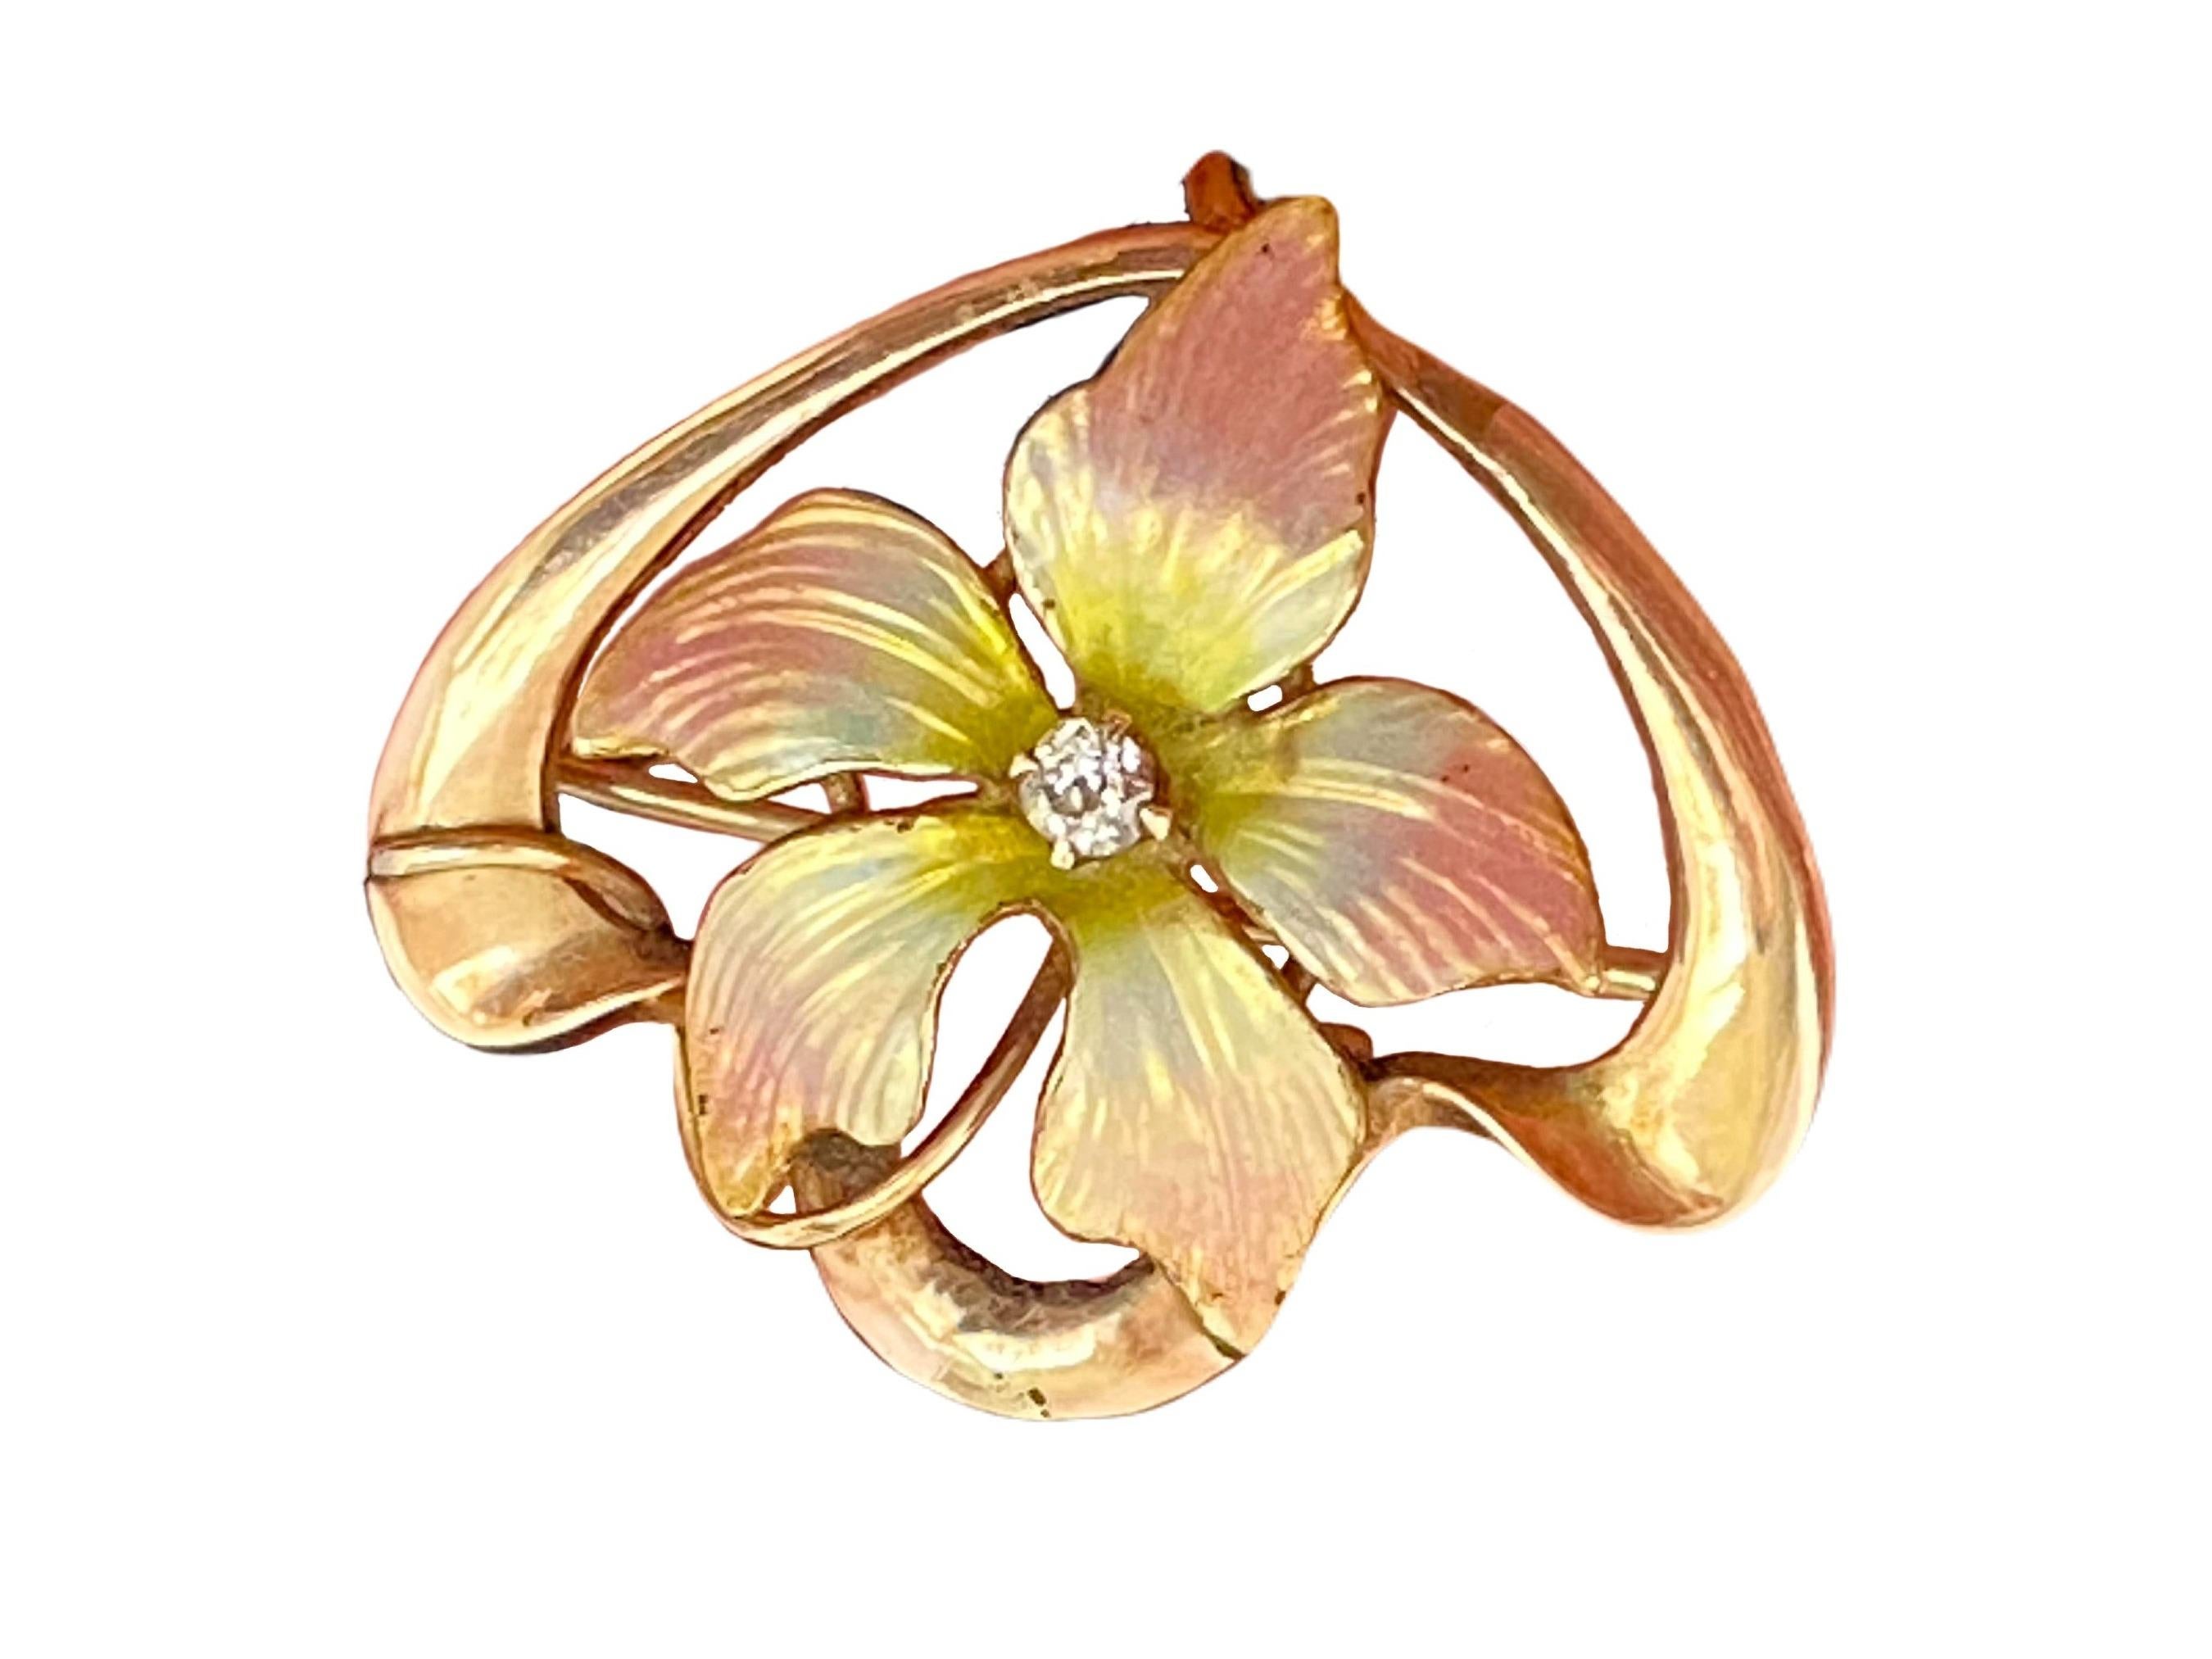 This stunning Art Nouveau Diamond Enamel 14K Rose Gold Flower Antique Convertible Brooch Pendant is an eye-catching piece of jewelry. Featuring a delicate enameled flower centered in swooping curves of 14K rose gold, this piece is beautifully